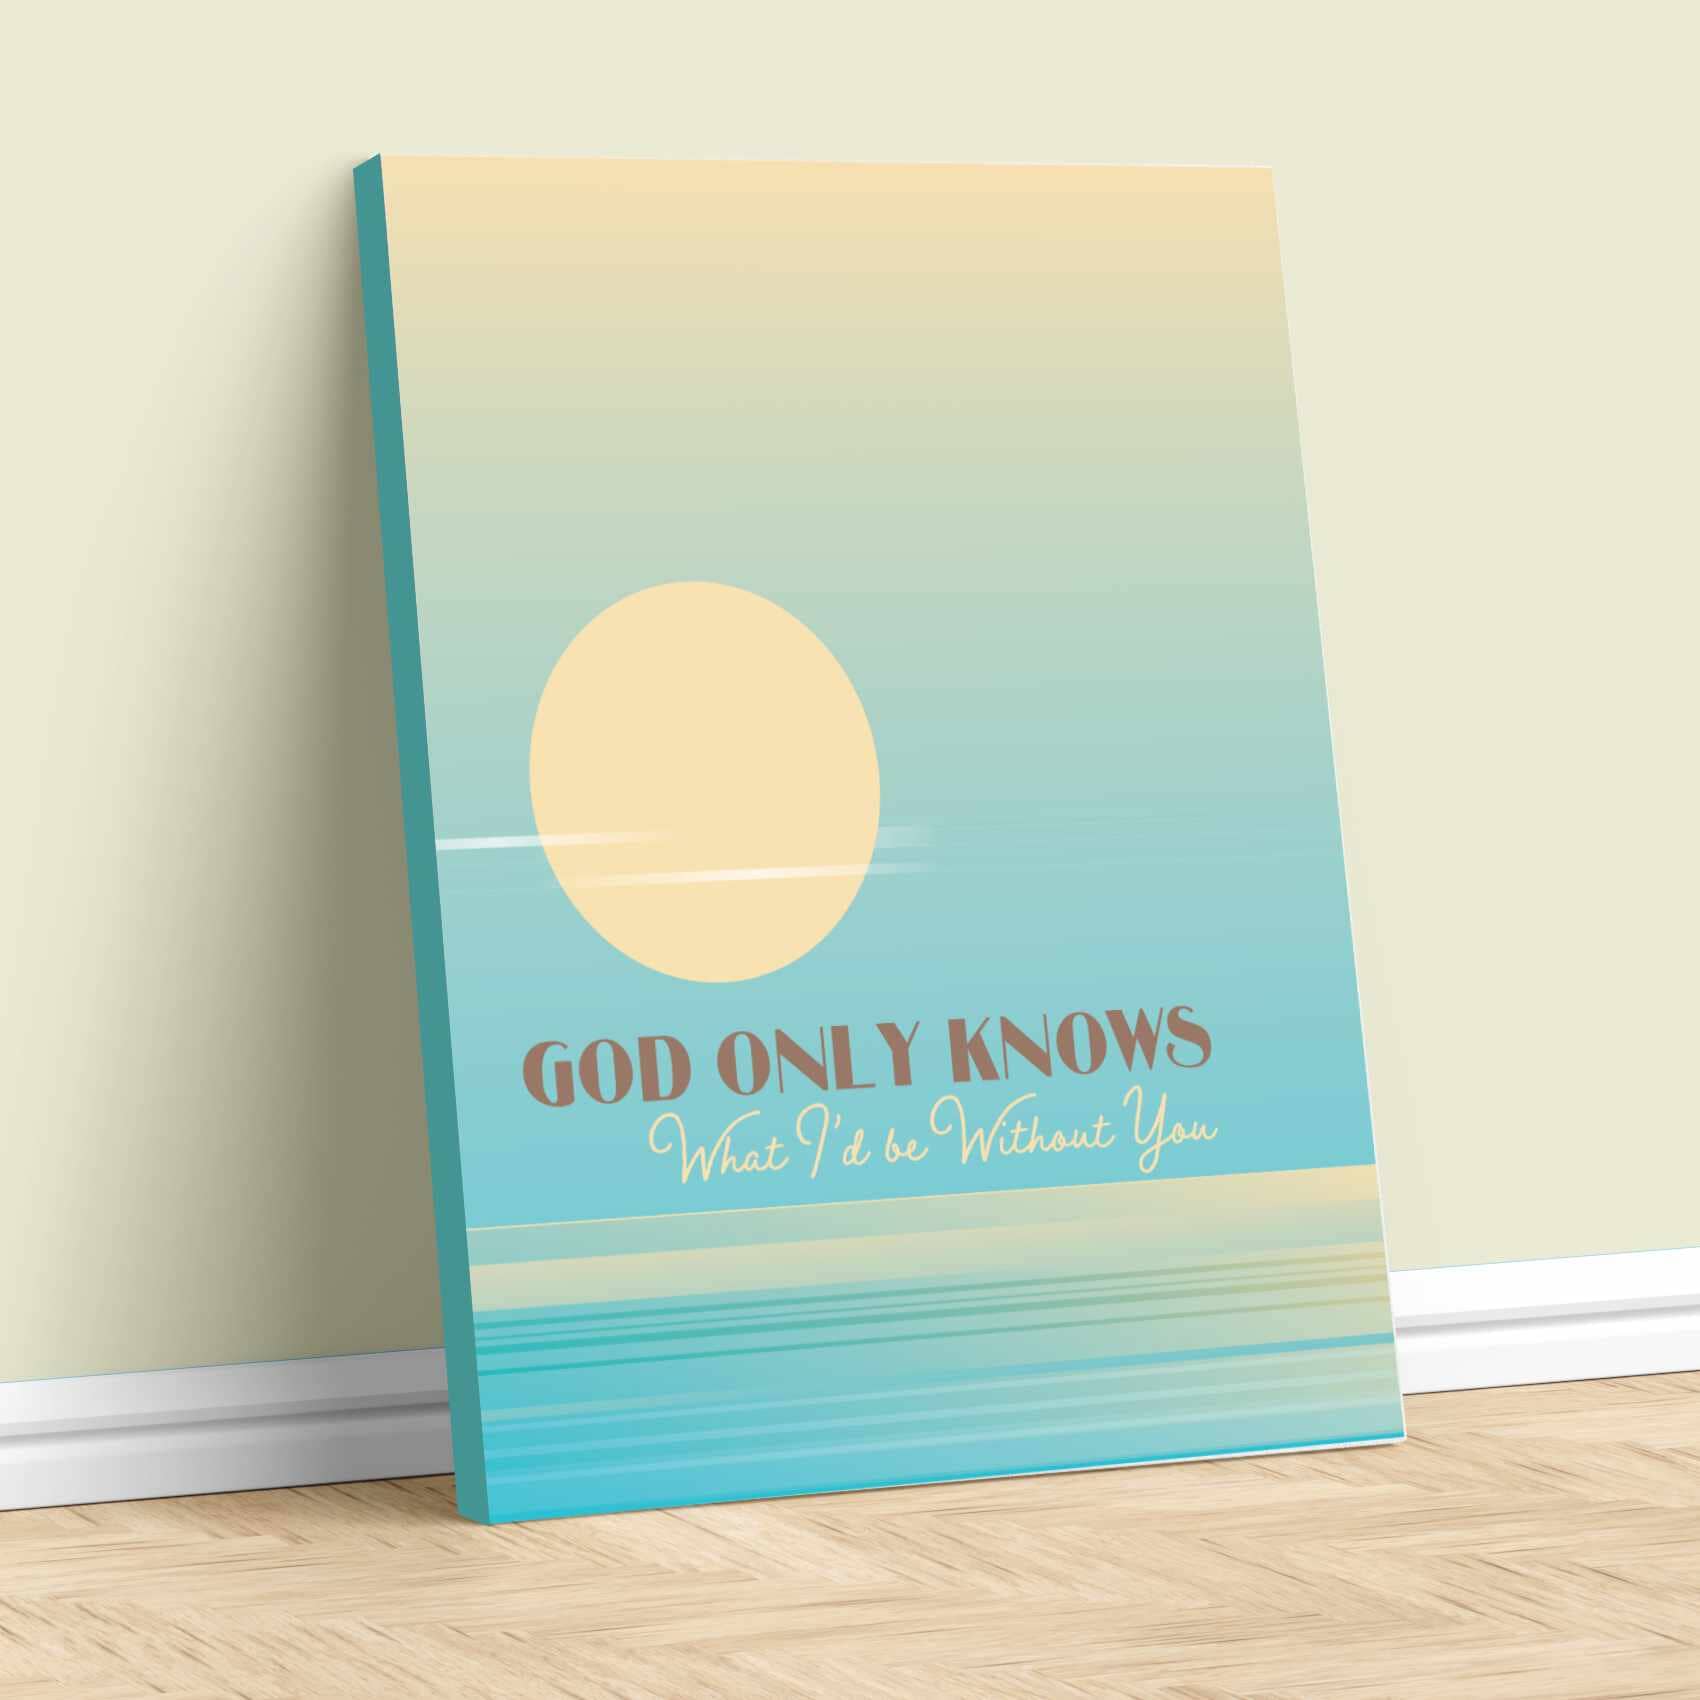 God Only Knows by the Beach Boys - Song Lyric Wall Art Song Lyrics Art Song Lyrics Art 11x14 Canvas Wrap 